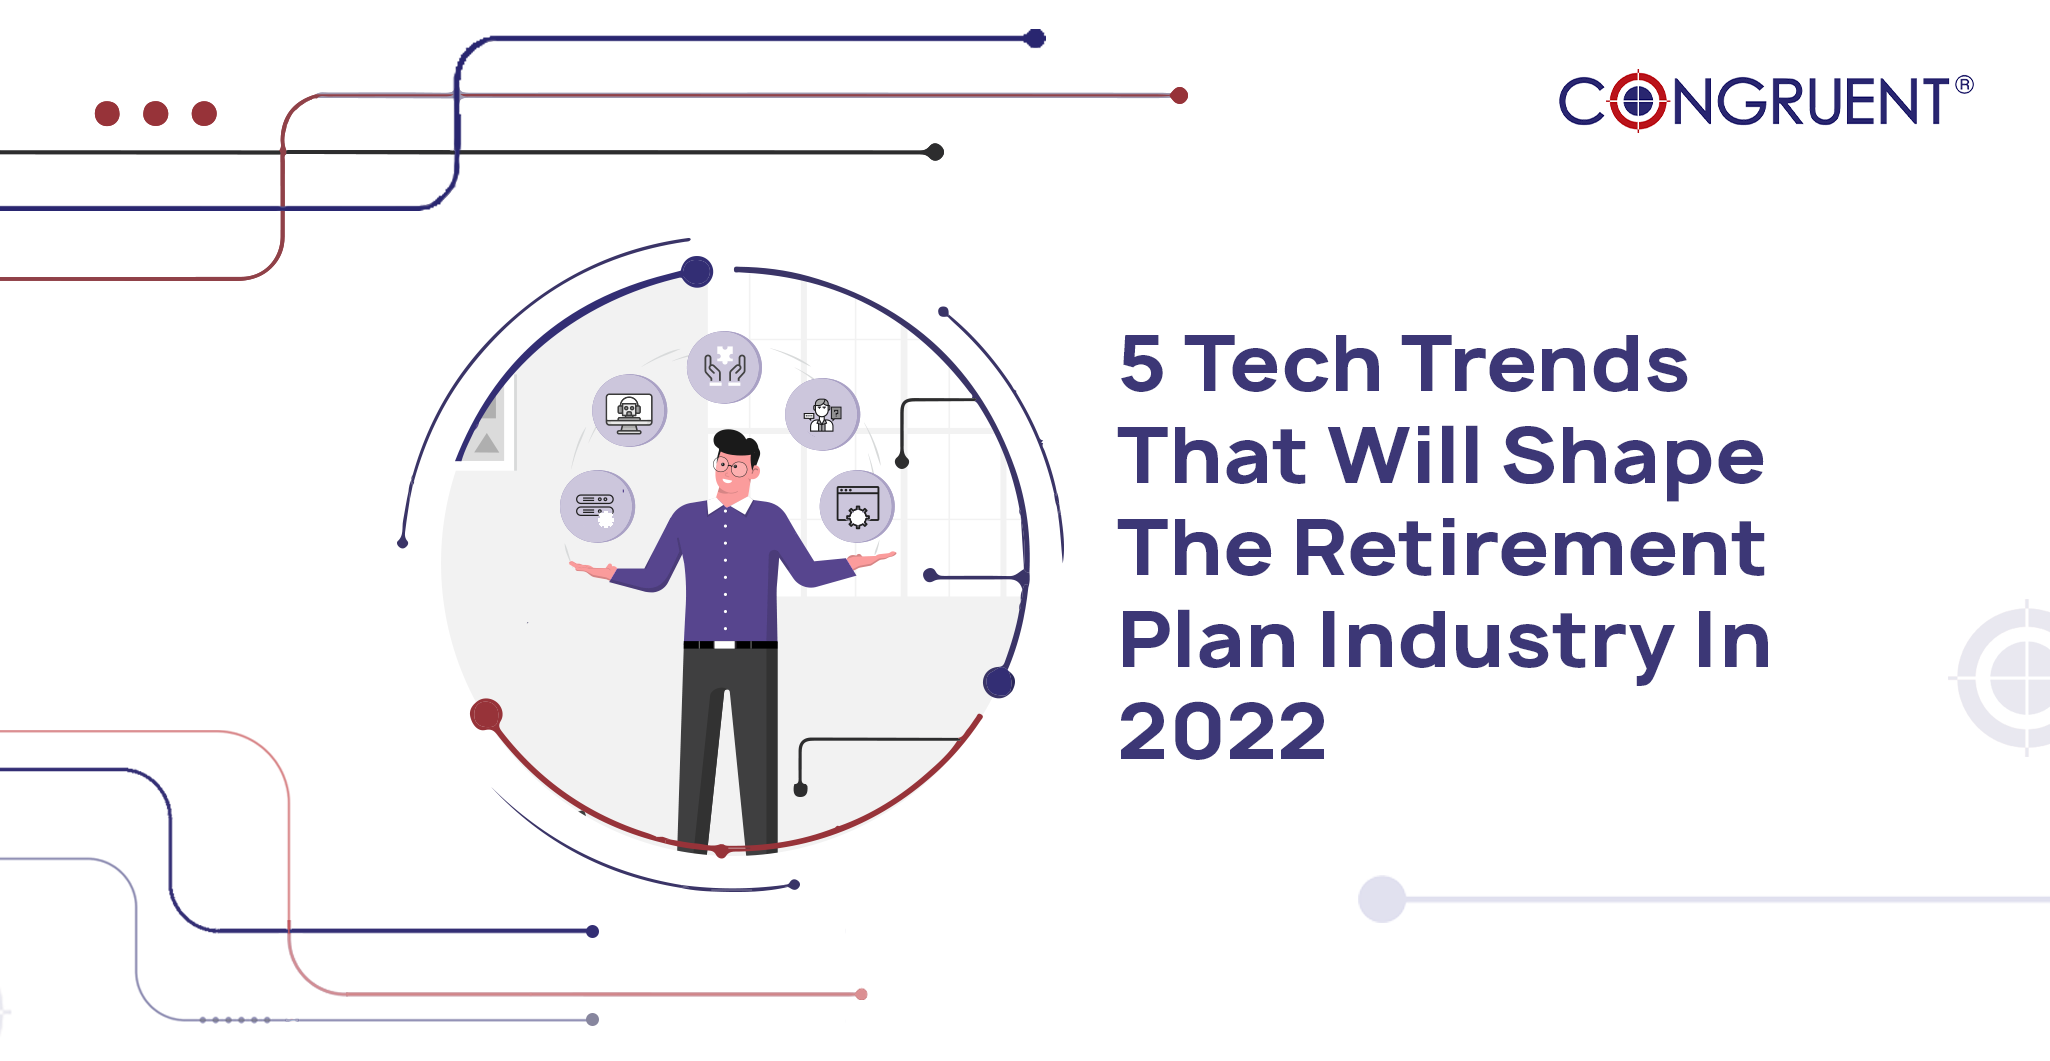 5 tech trends that will shape the retirement plan industry in 2022